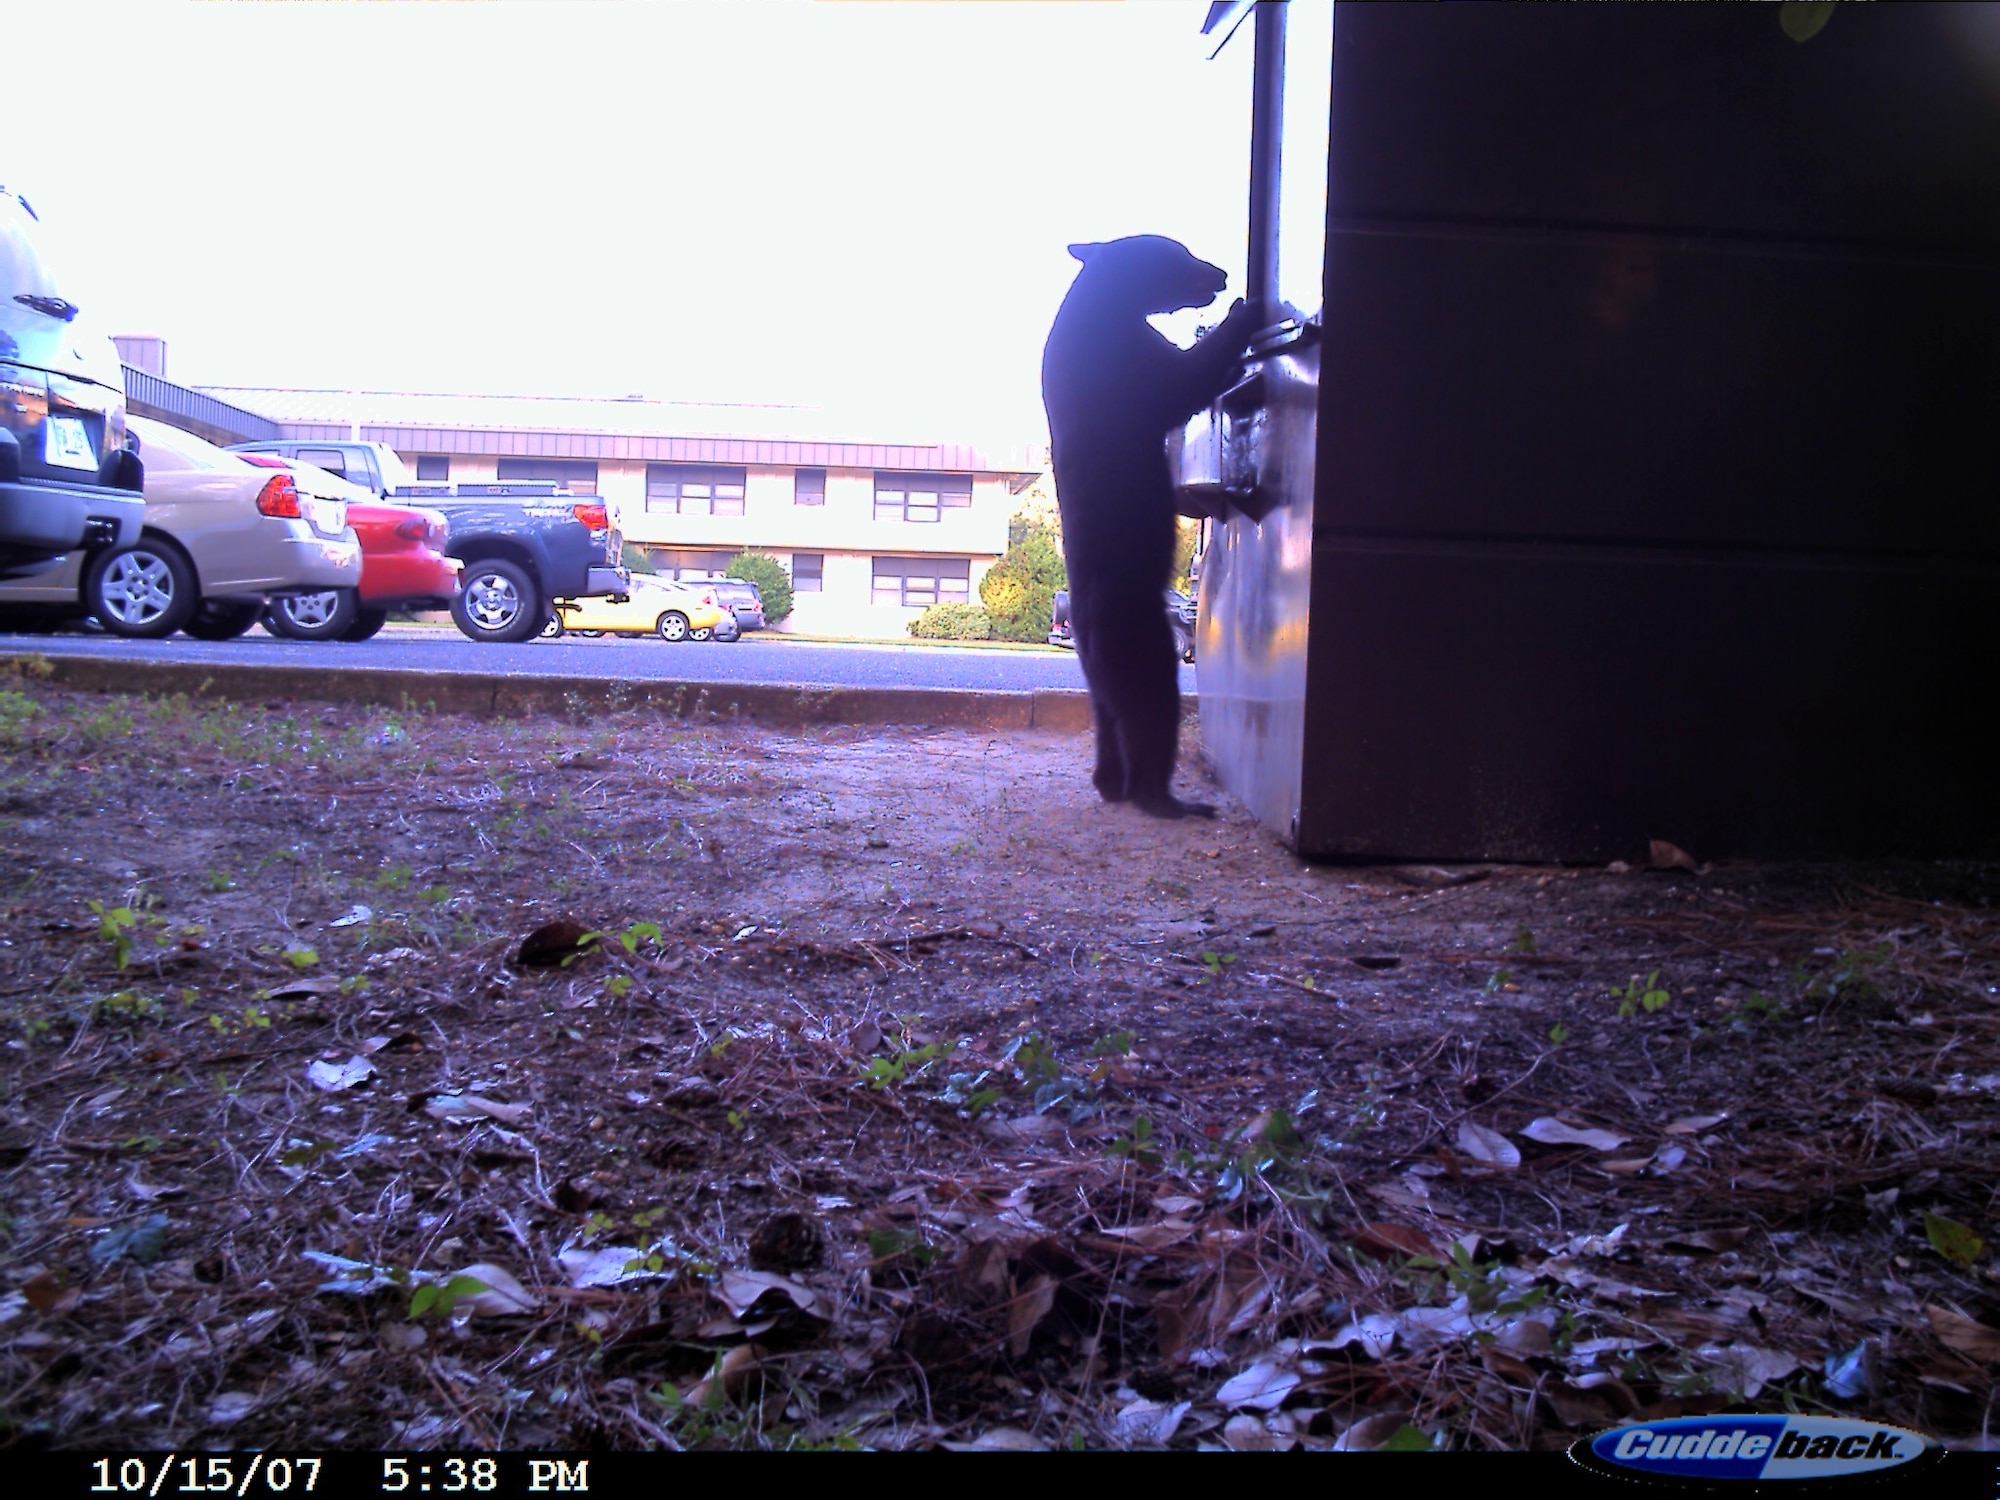 This bear cub was spotted eating out of the dumpster by one of the dorms on base last year. (Courtesy photo)